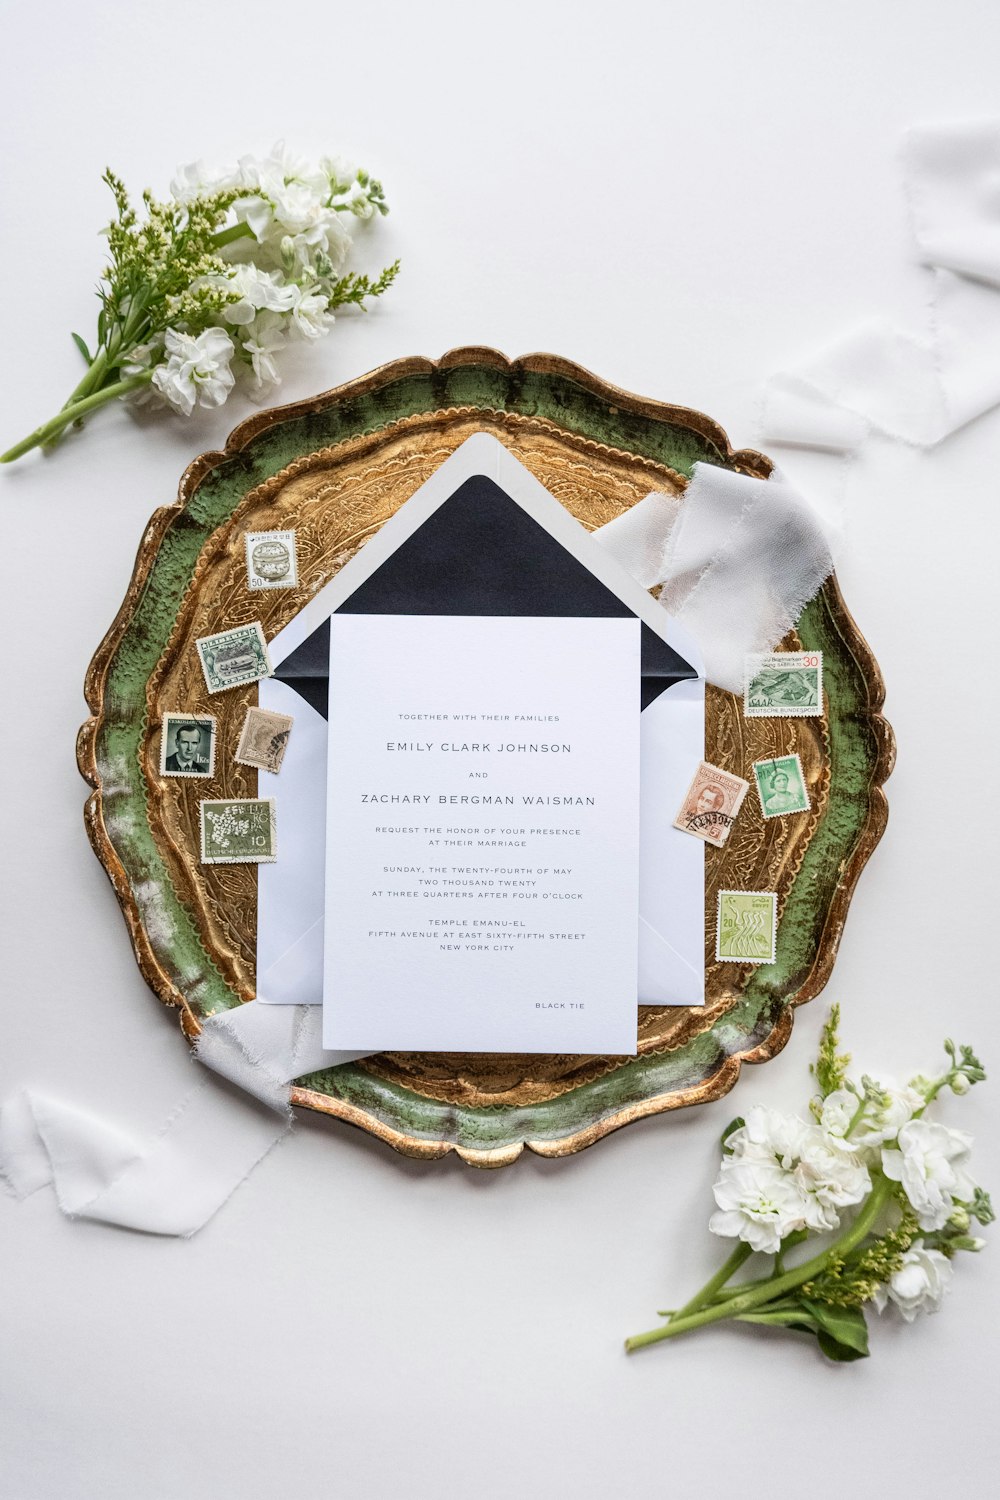 a wedding stationery with a black and white envelope